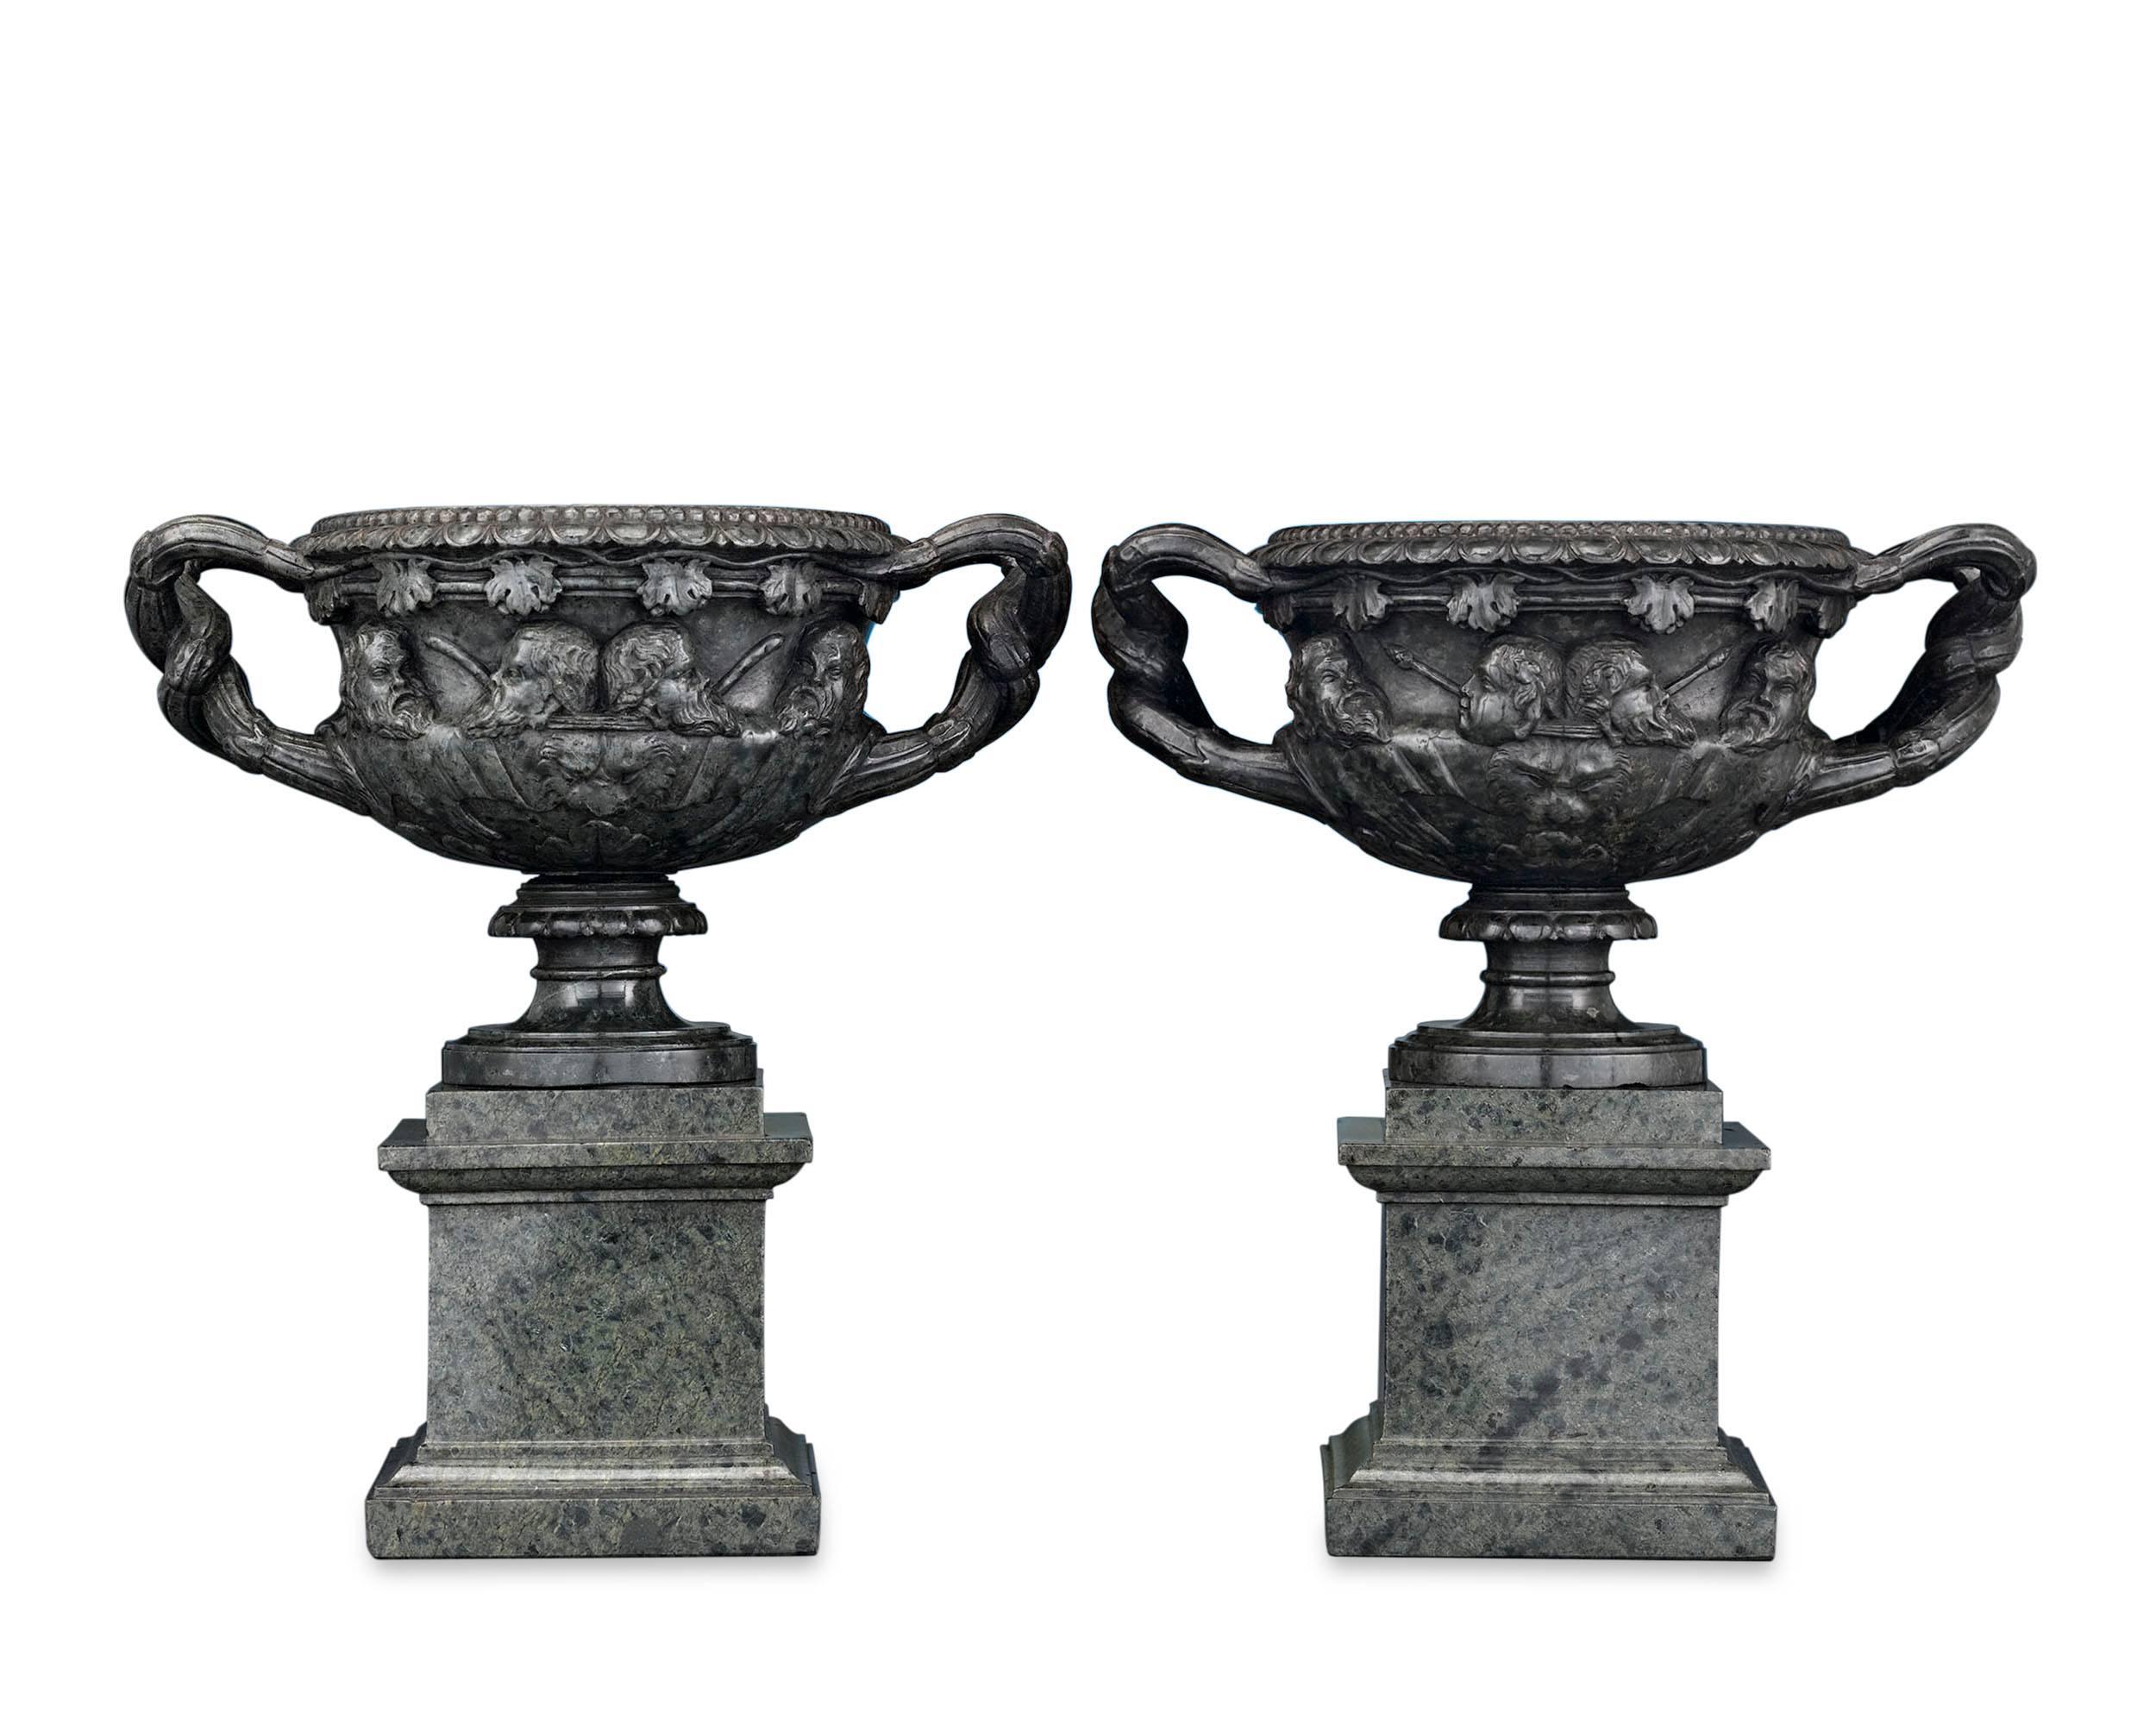 This remarkable pair of carved green serpentine marble vases were modeled after the legendary Warwick vase. Found at the Roman Emperor Hadrian's villa in 1770 and subsequently held in the collection of the Earl of Warwick, the vase remains one of